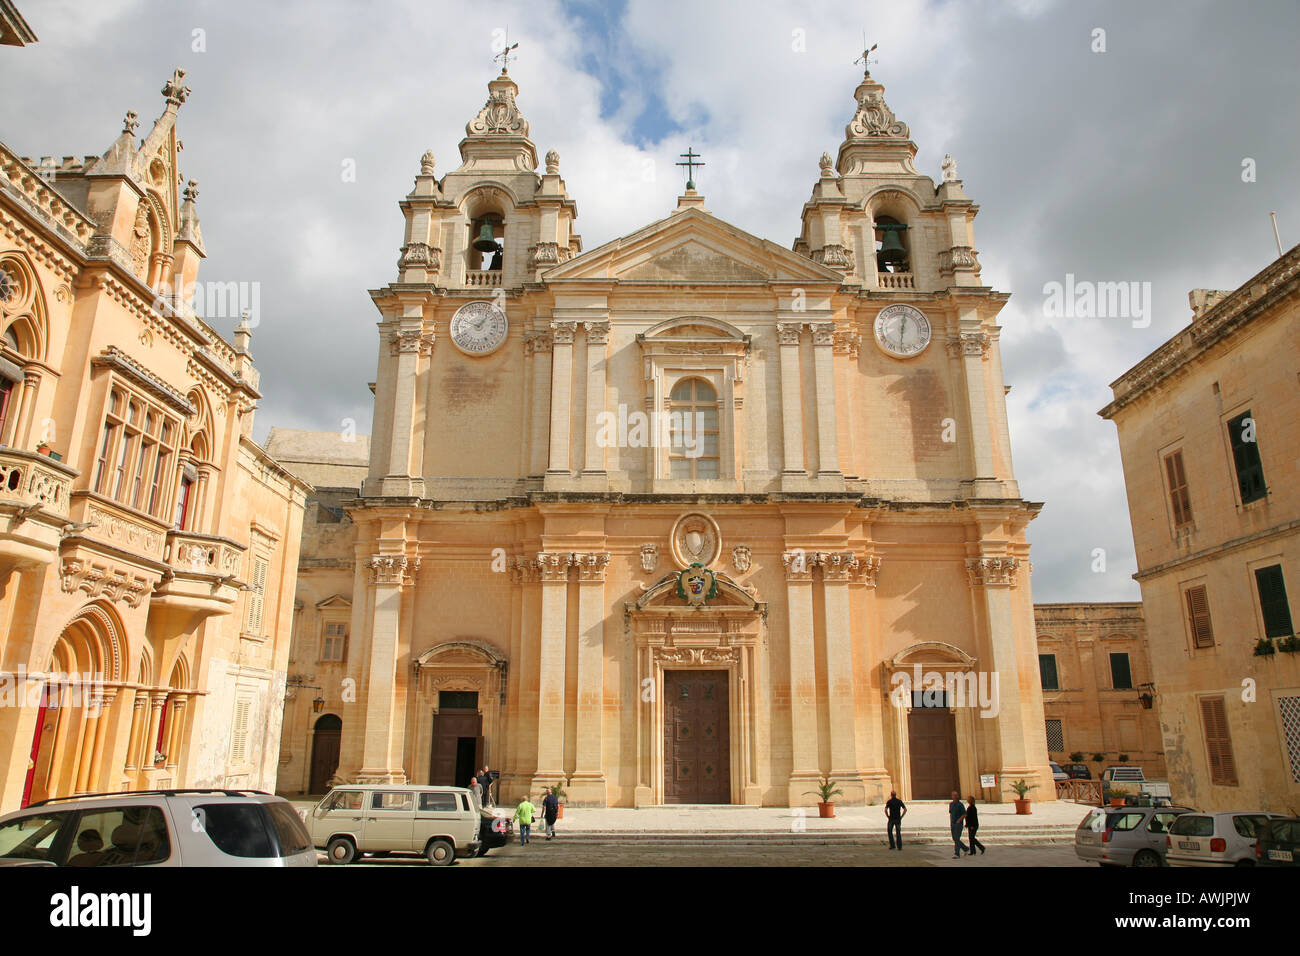 St Paul s cathedral in Mdina Malta Stock Photo